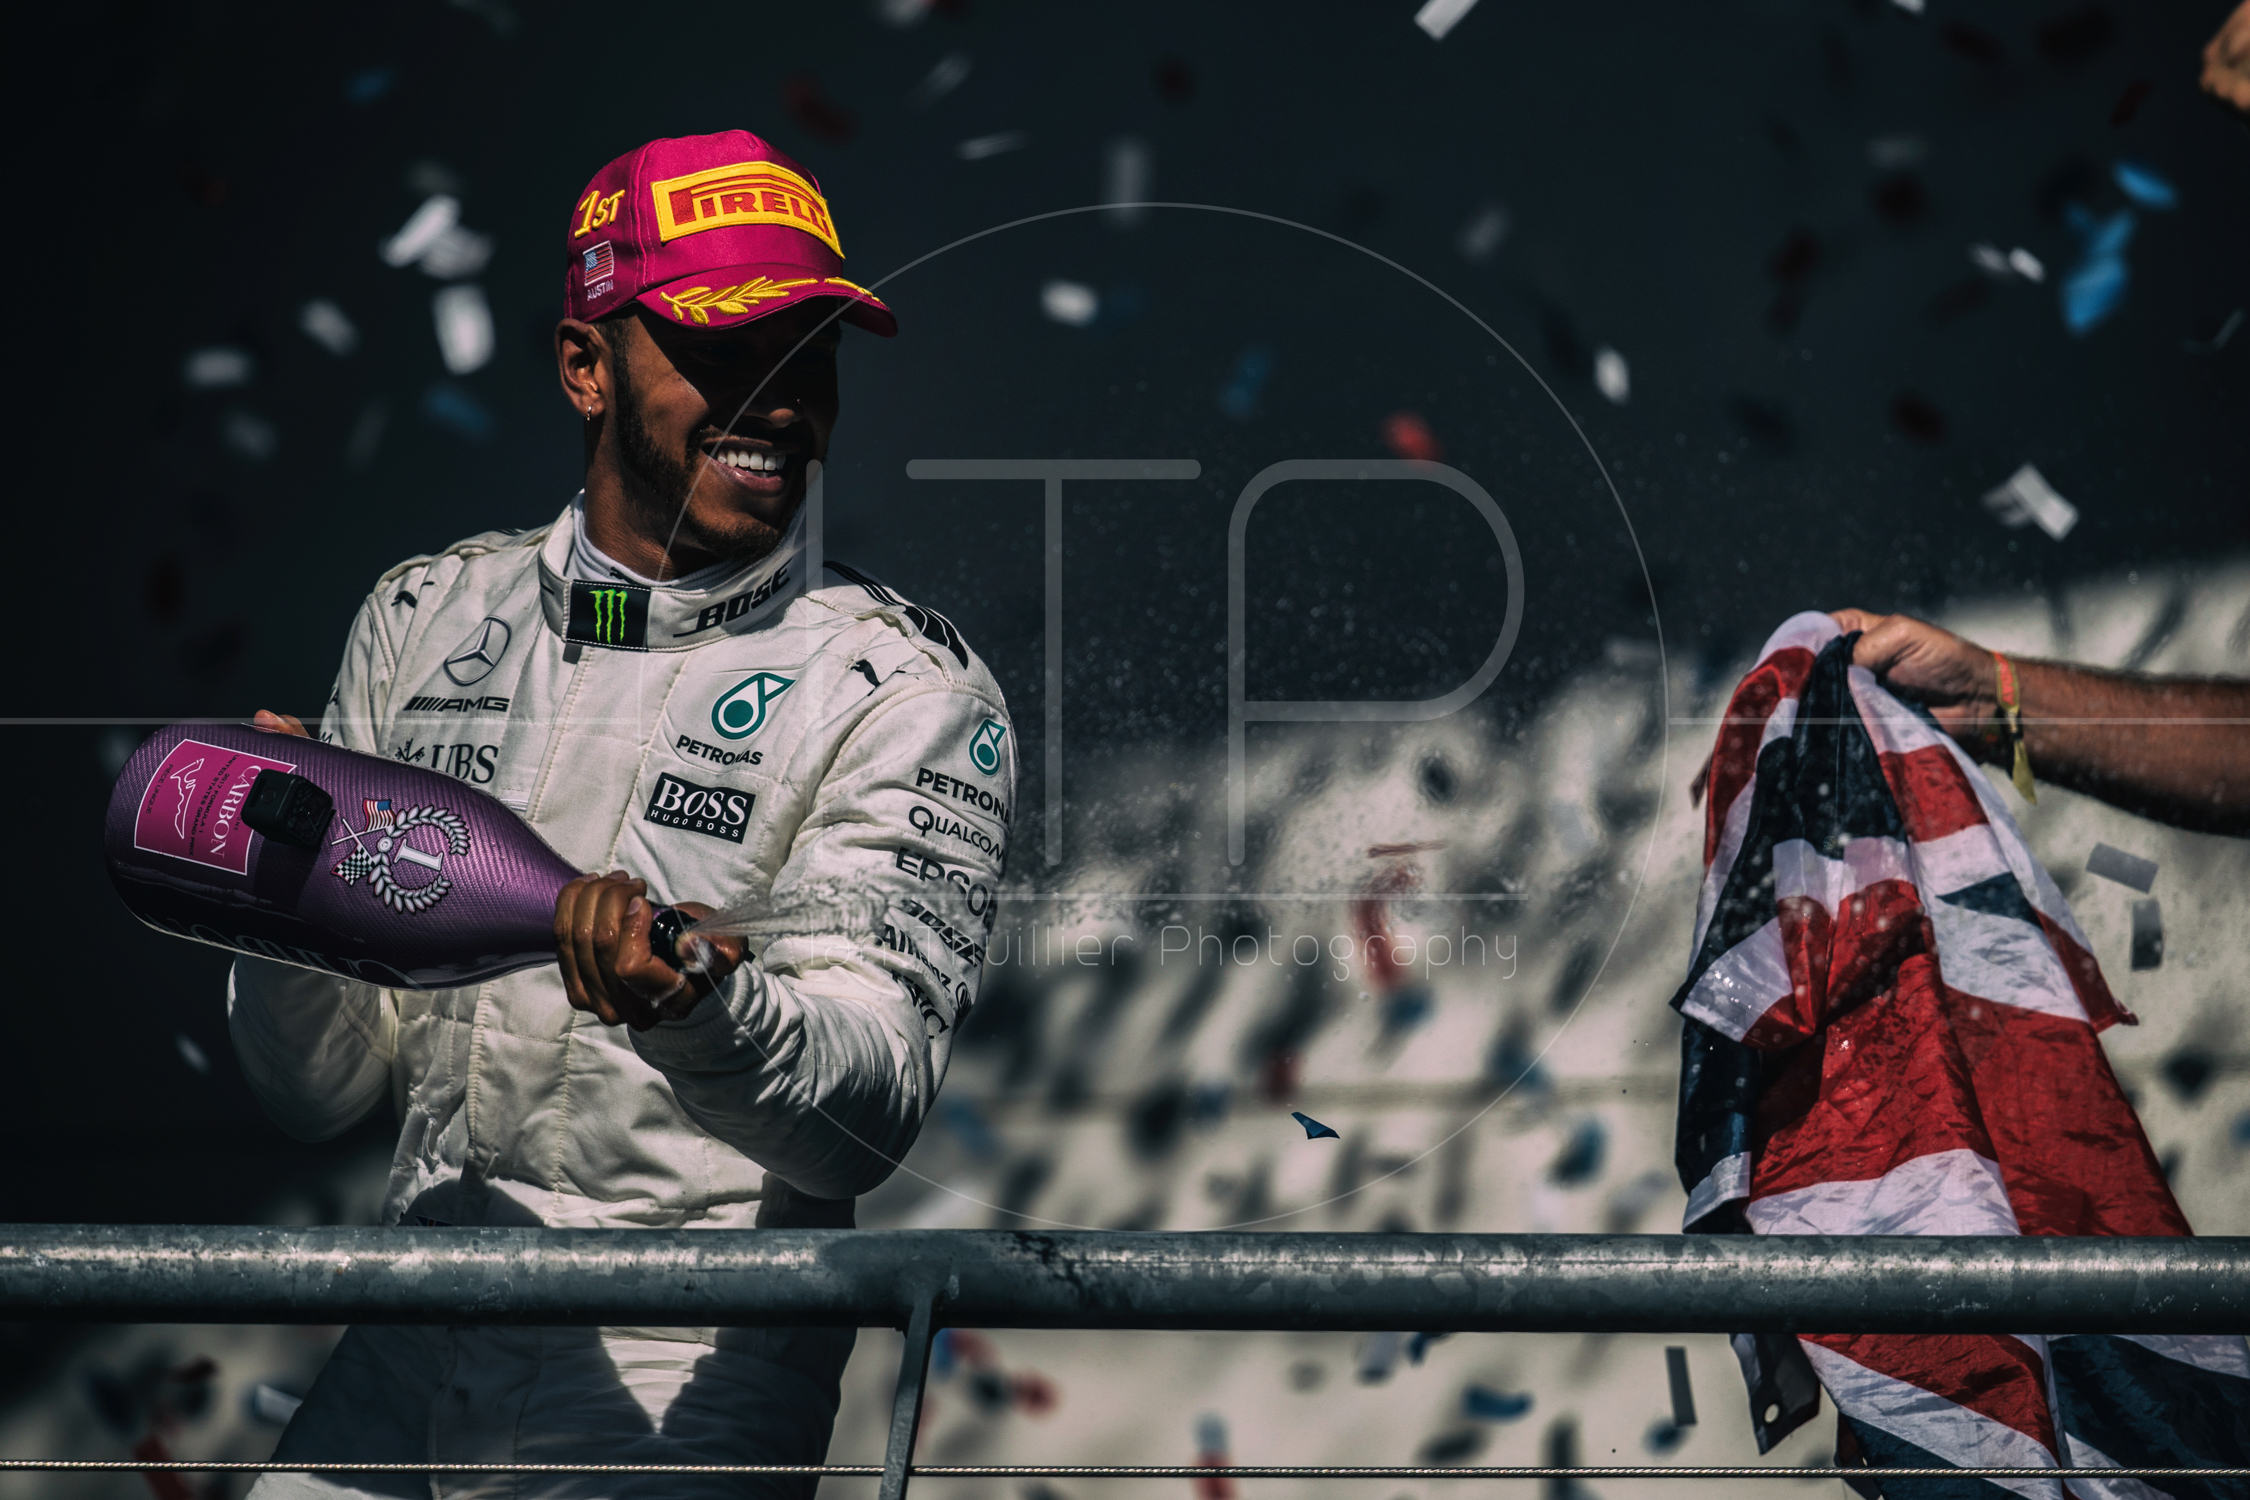 Formula 1 2017: United States Grand Prix by Ian Thuillier. 